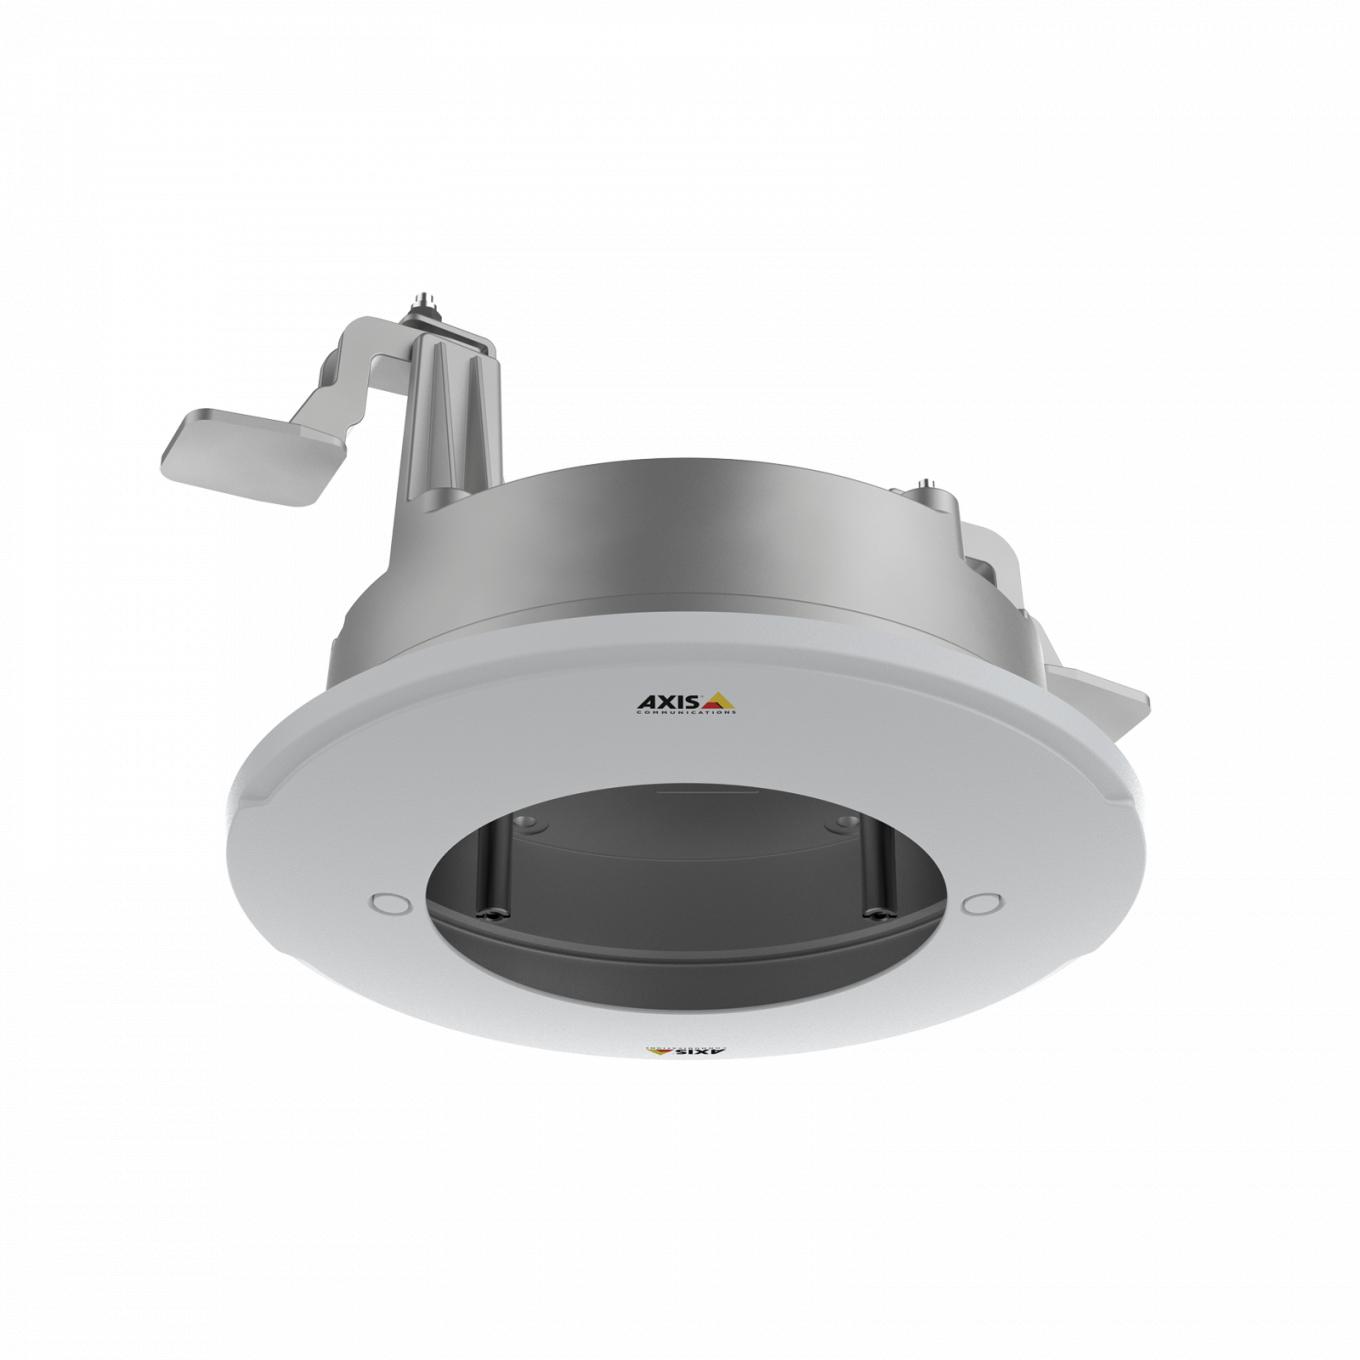 AXIS TM3205 Plenum Recessed Mount, viewed fromt its front